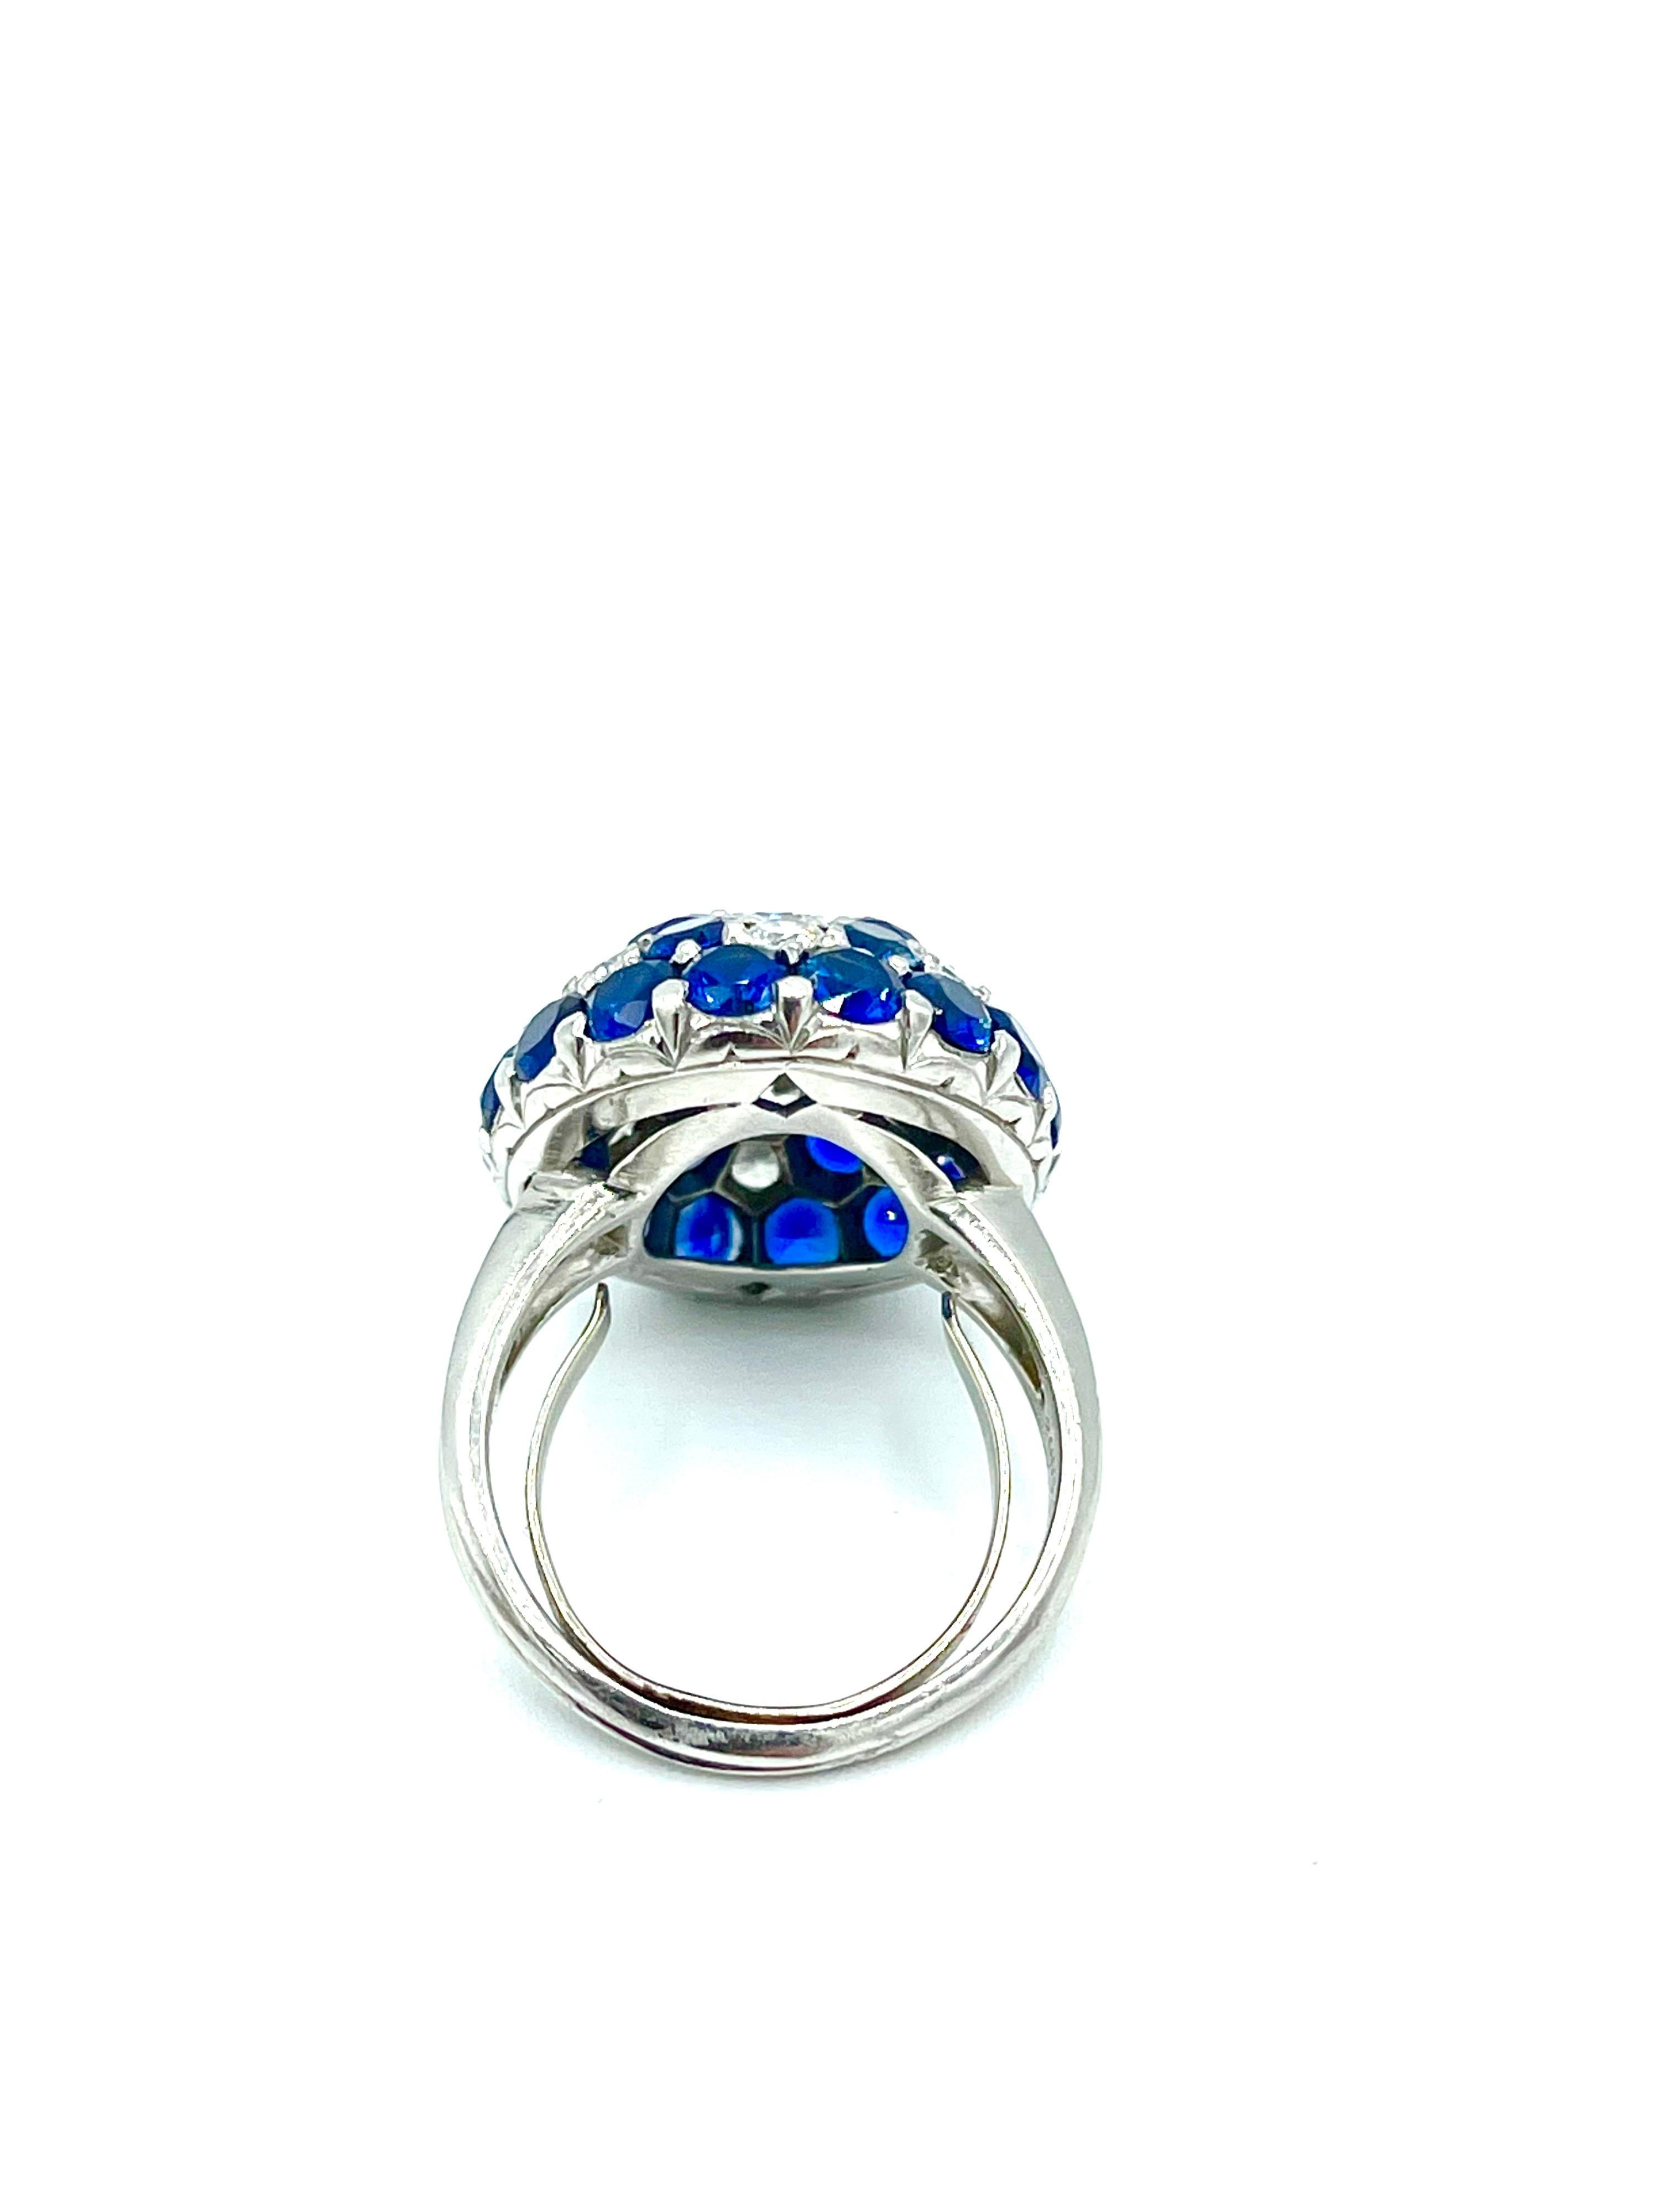 7.06cts Natural blue Sapphire and Diamond Star Platinum Cocktail Ring In Excellent Condition For Sale In Chevy Chase, MD